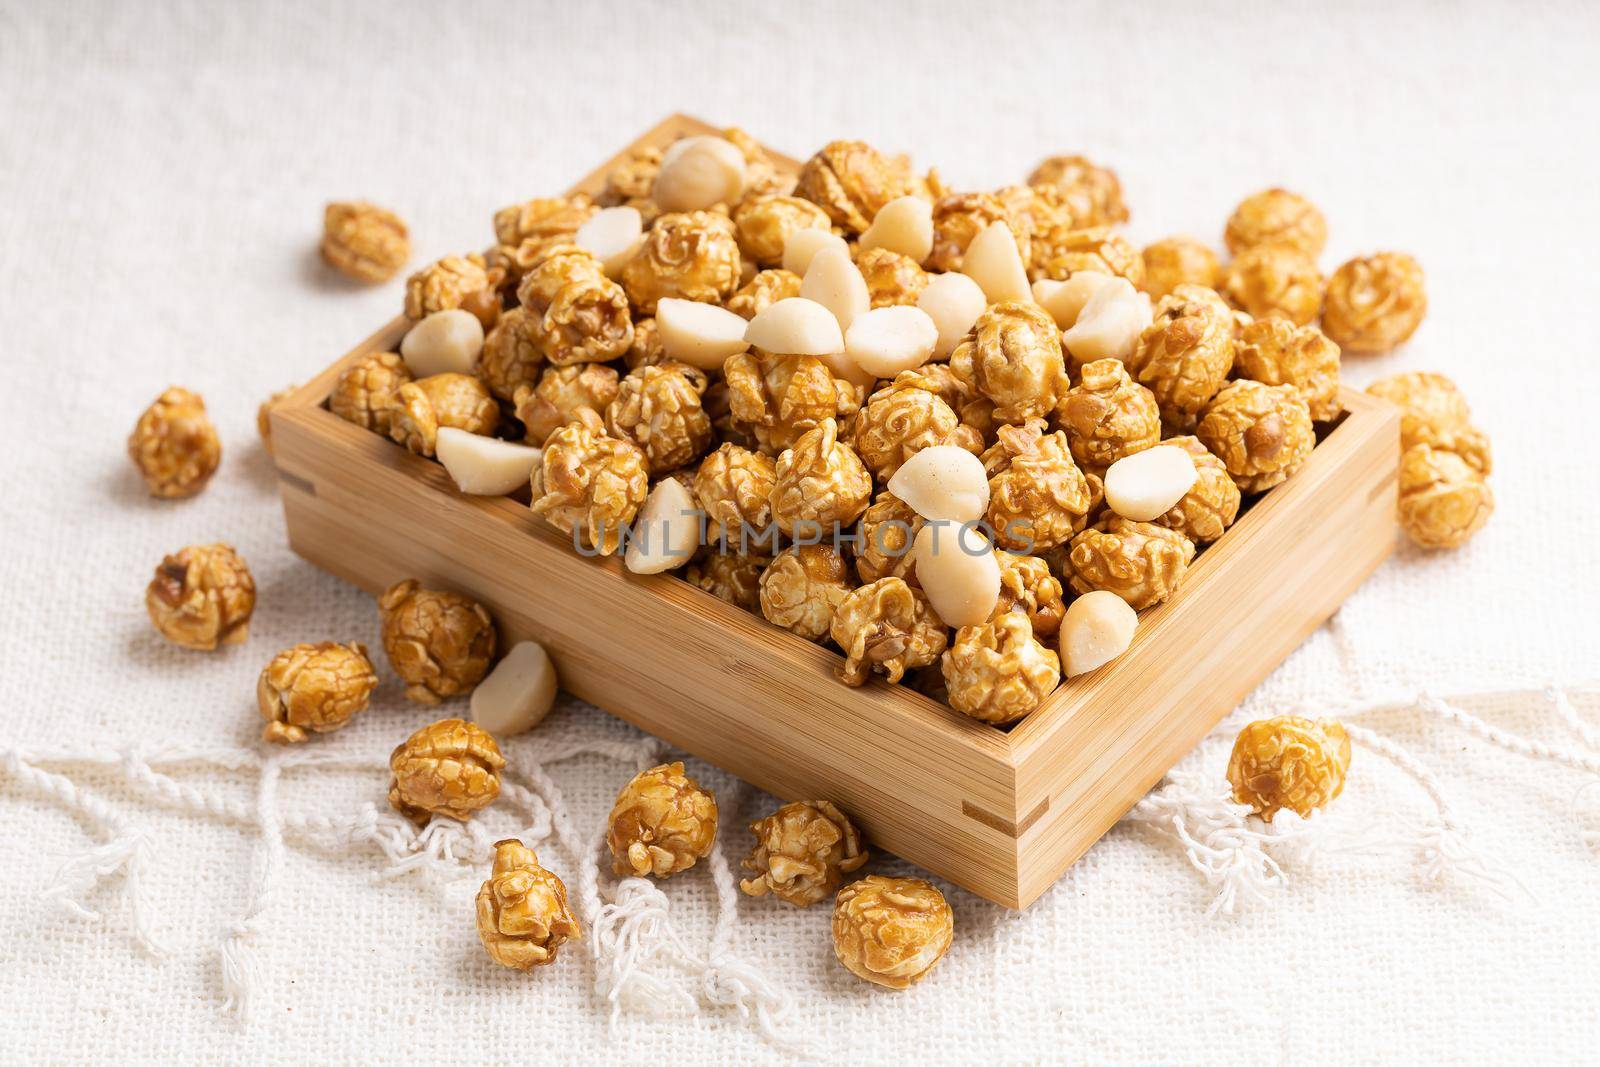 Caramel popcorn with macadamia nut in bamboo wooden box by smuay